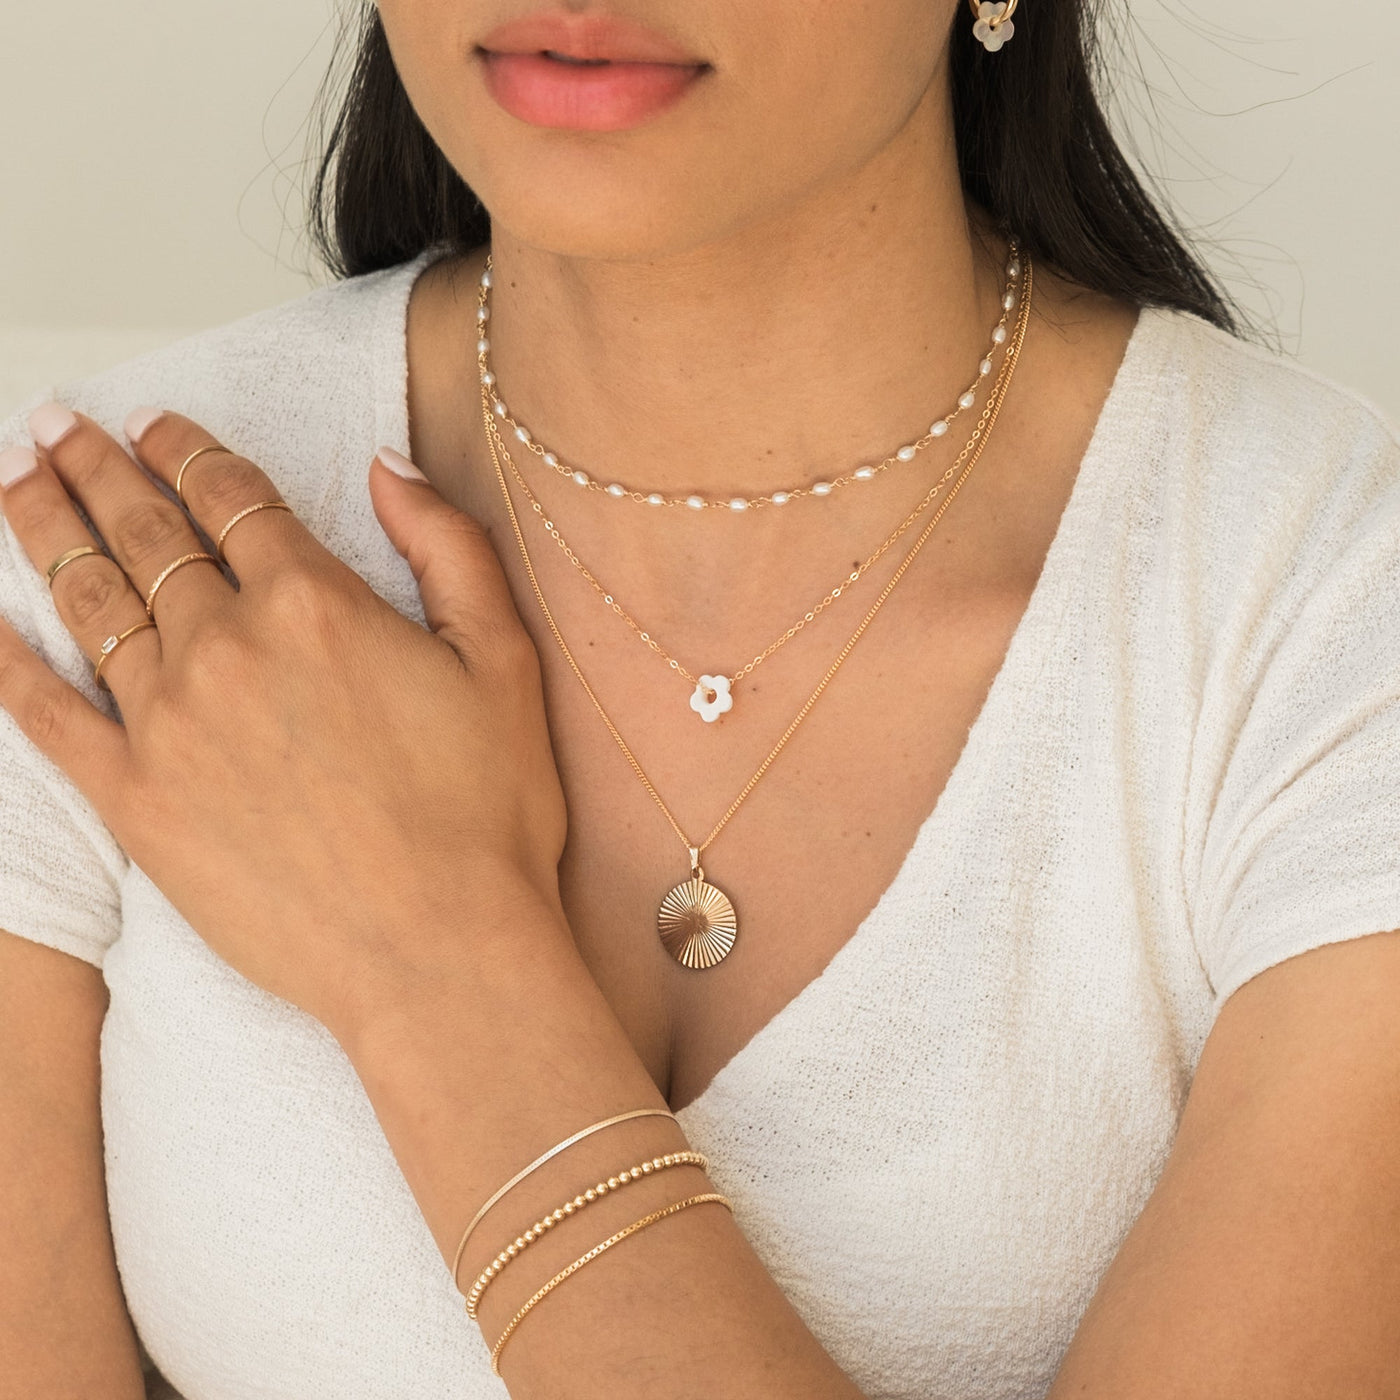 Dainty Flower Pearl Station Necklace